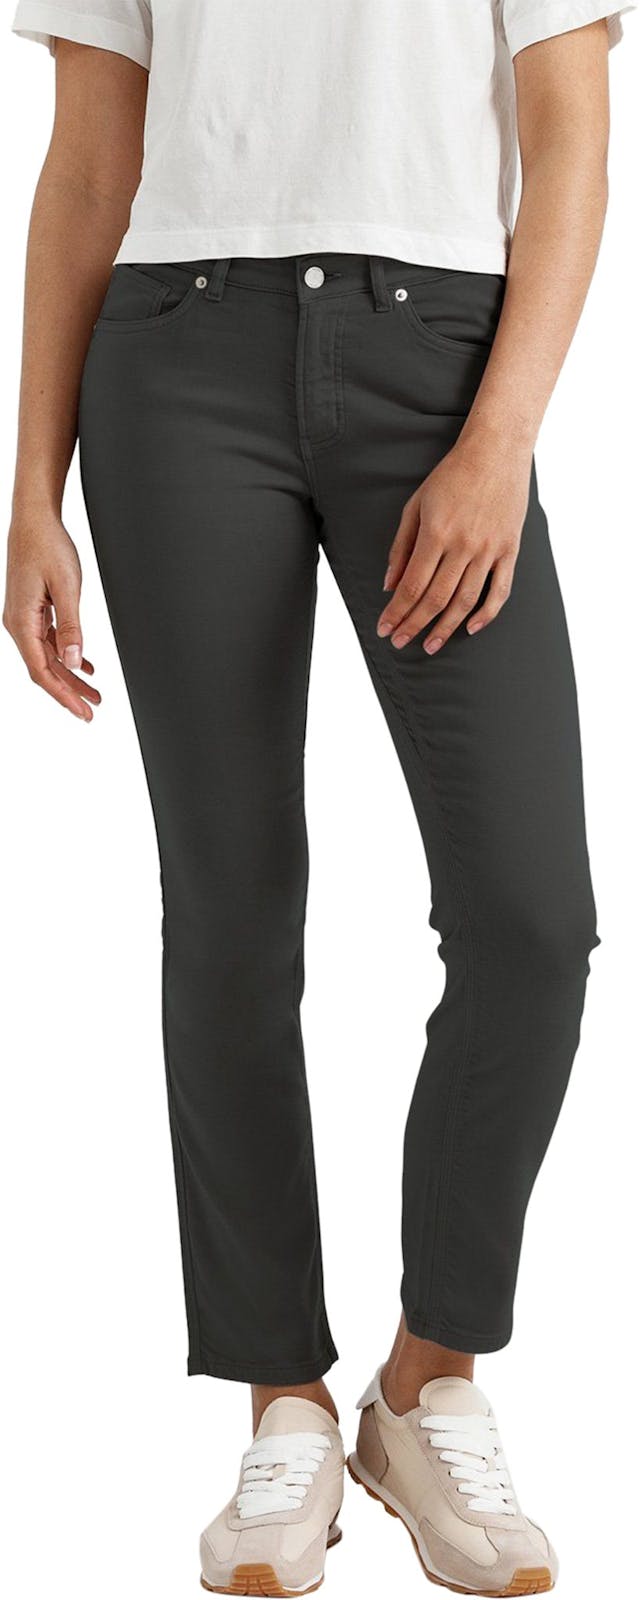 Product image for No Sweat Pant Slim Straight - Women's